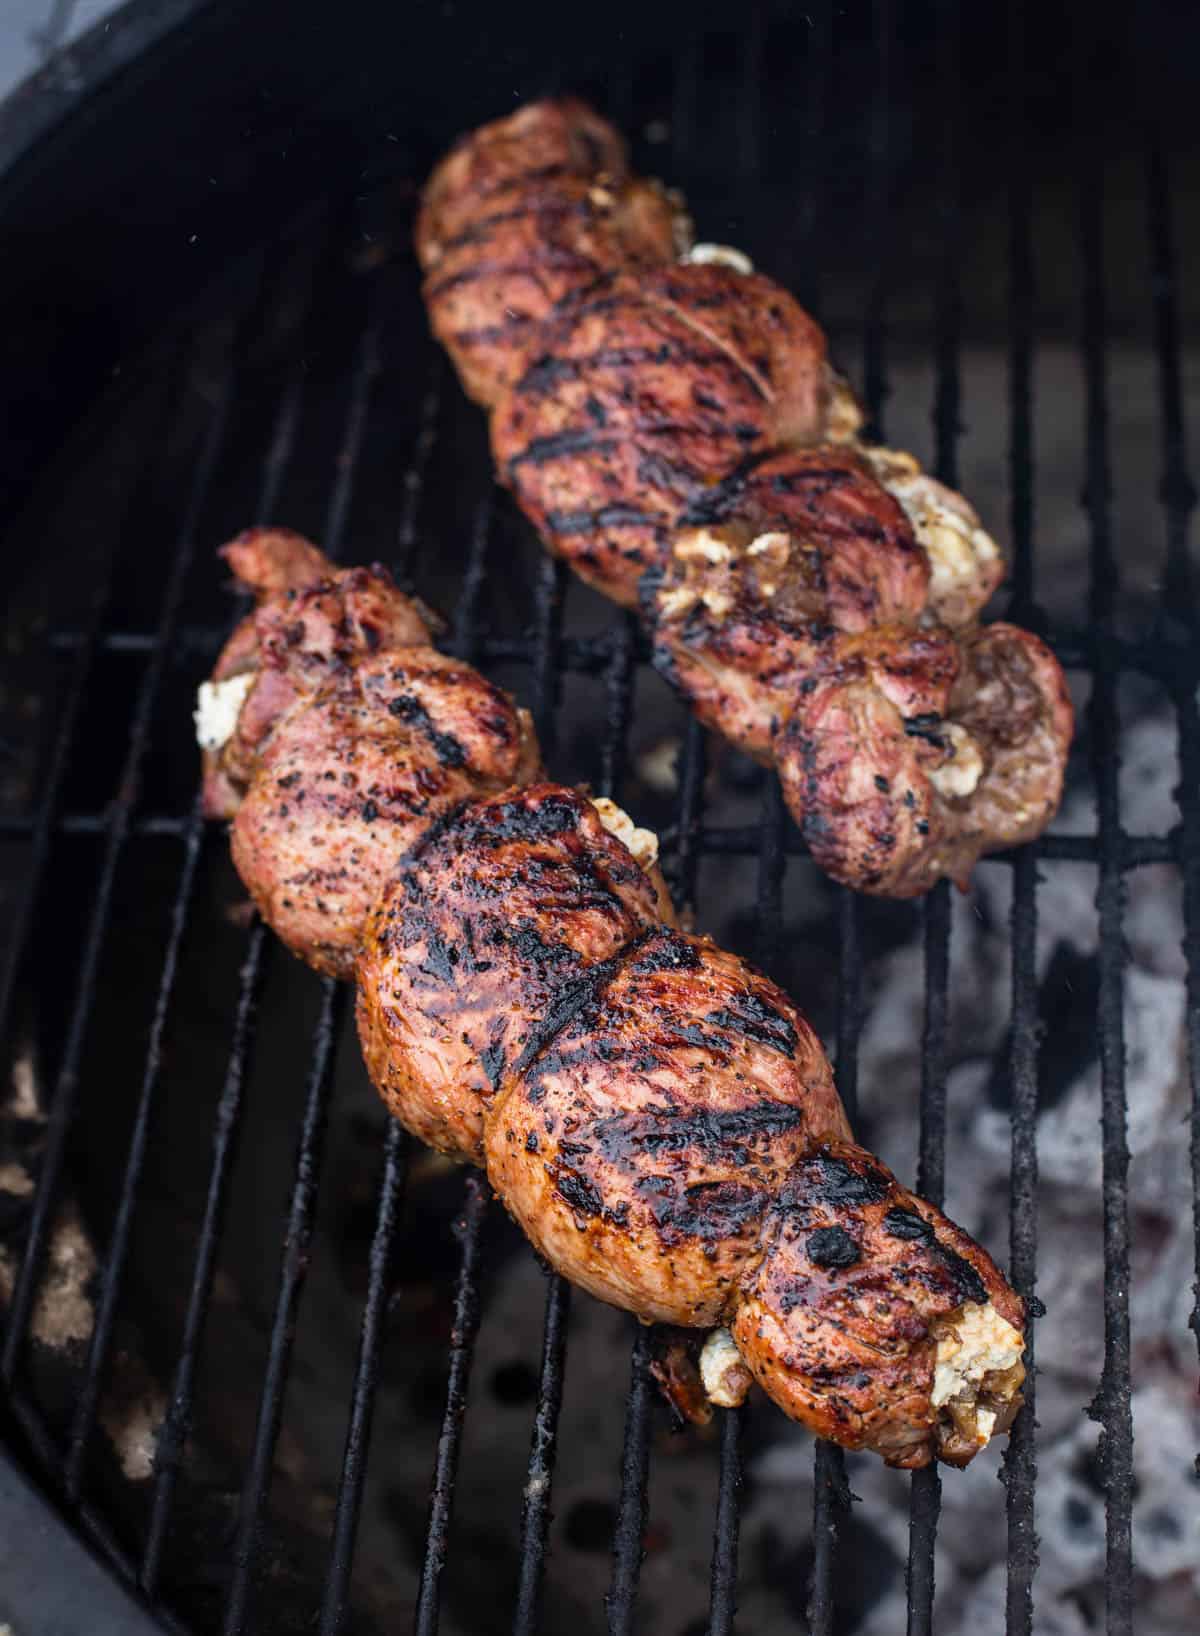 Two Stuffed Pork Tenderloins cooking on the grill